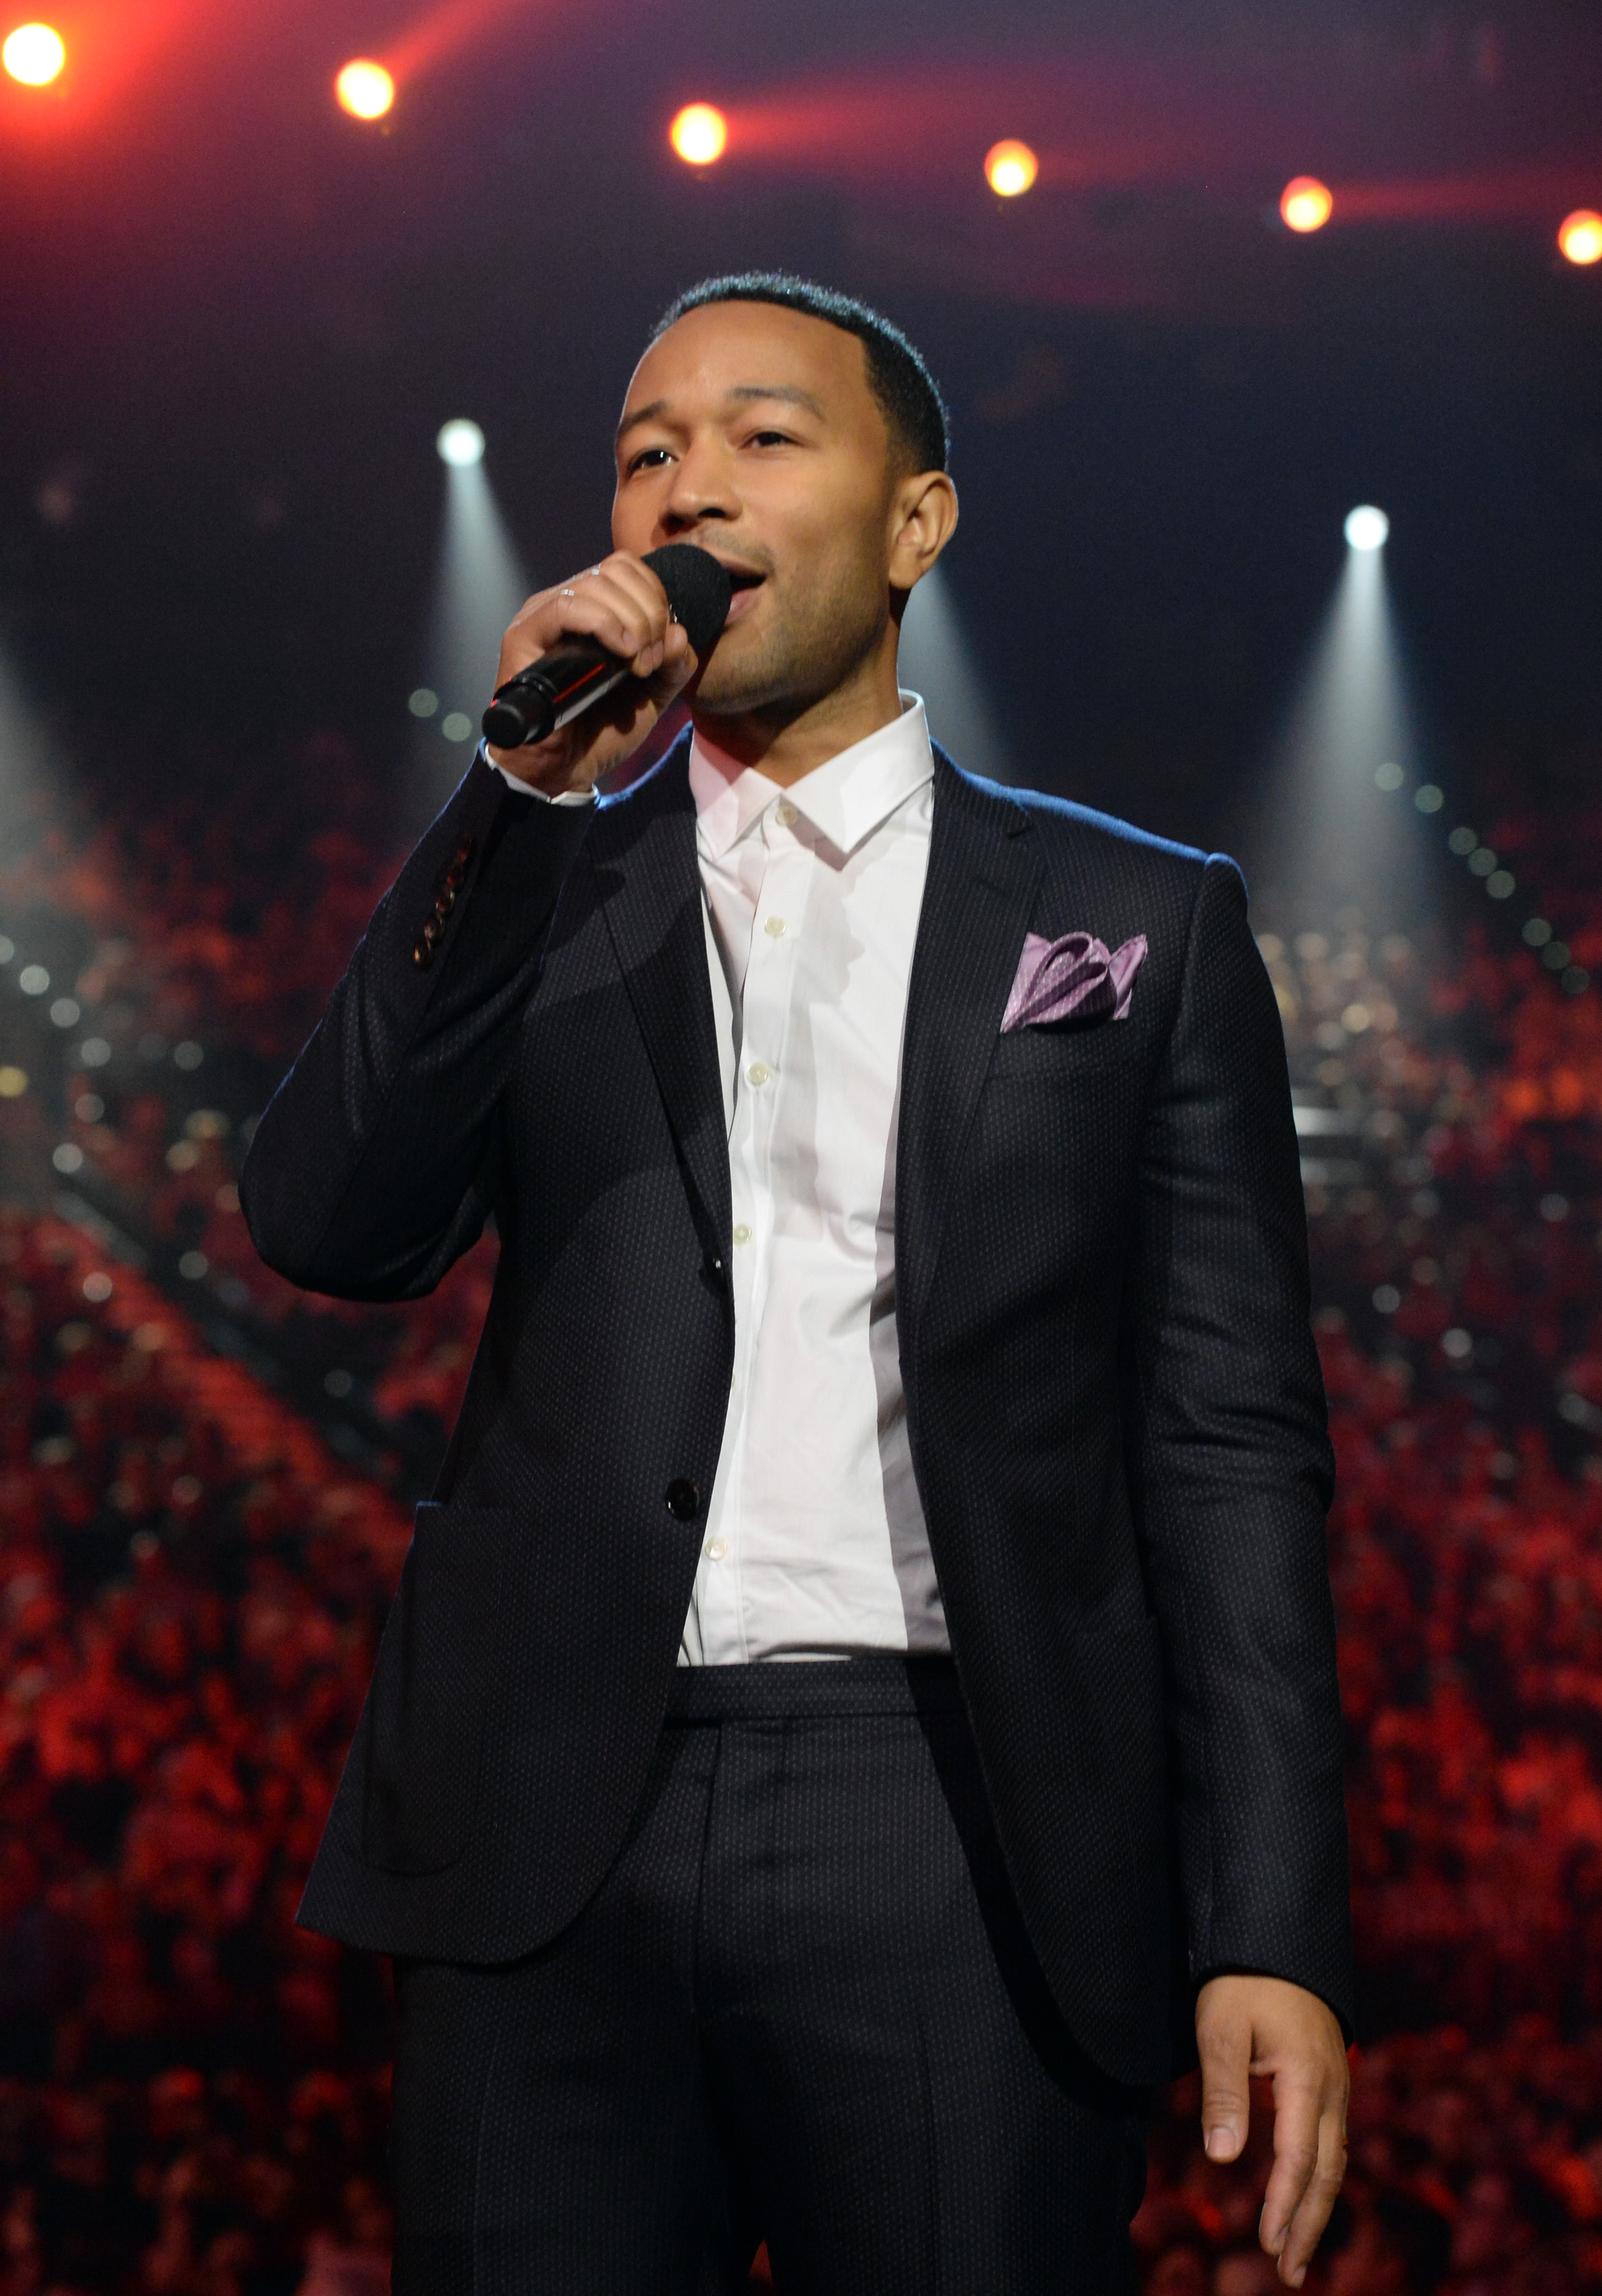 John Legend onstage during the 2015 Billboard Music Awards at MGM Grand Garden Arena on May 17, 2015 in Las Vegas, Nevada. (Jeff Kravitz&mdash;BMA2015/Getty Images)